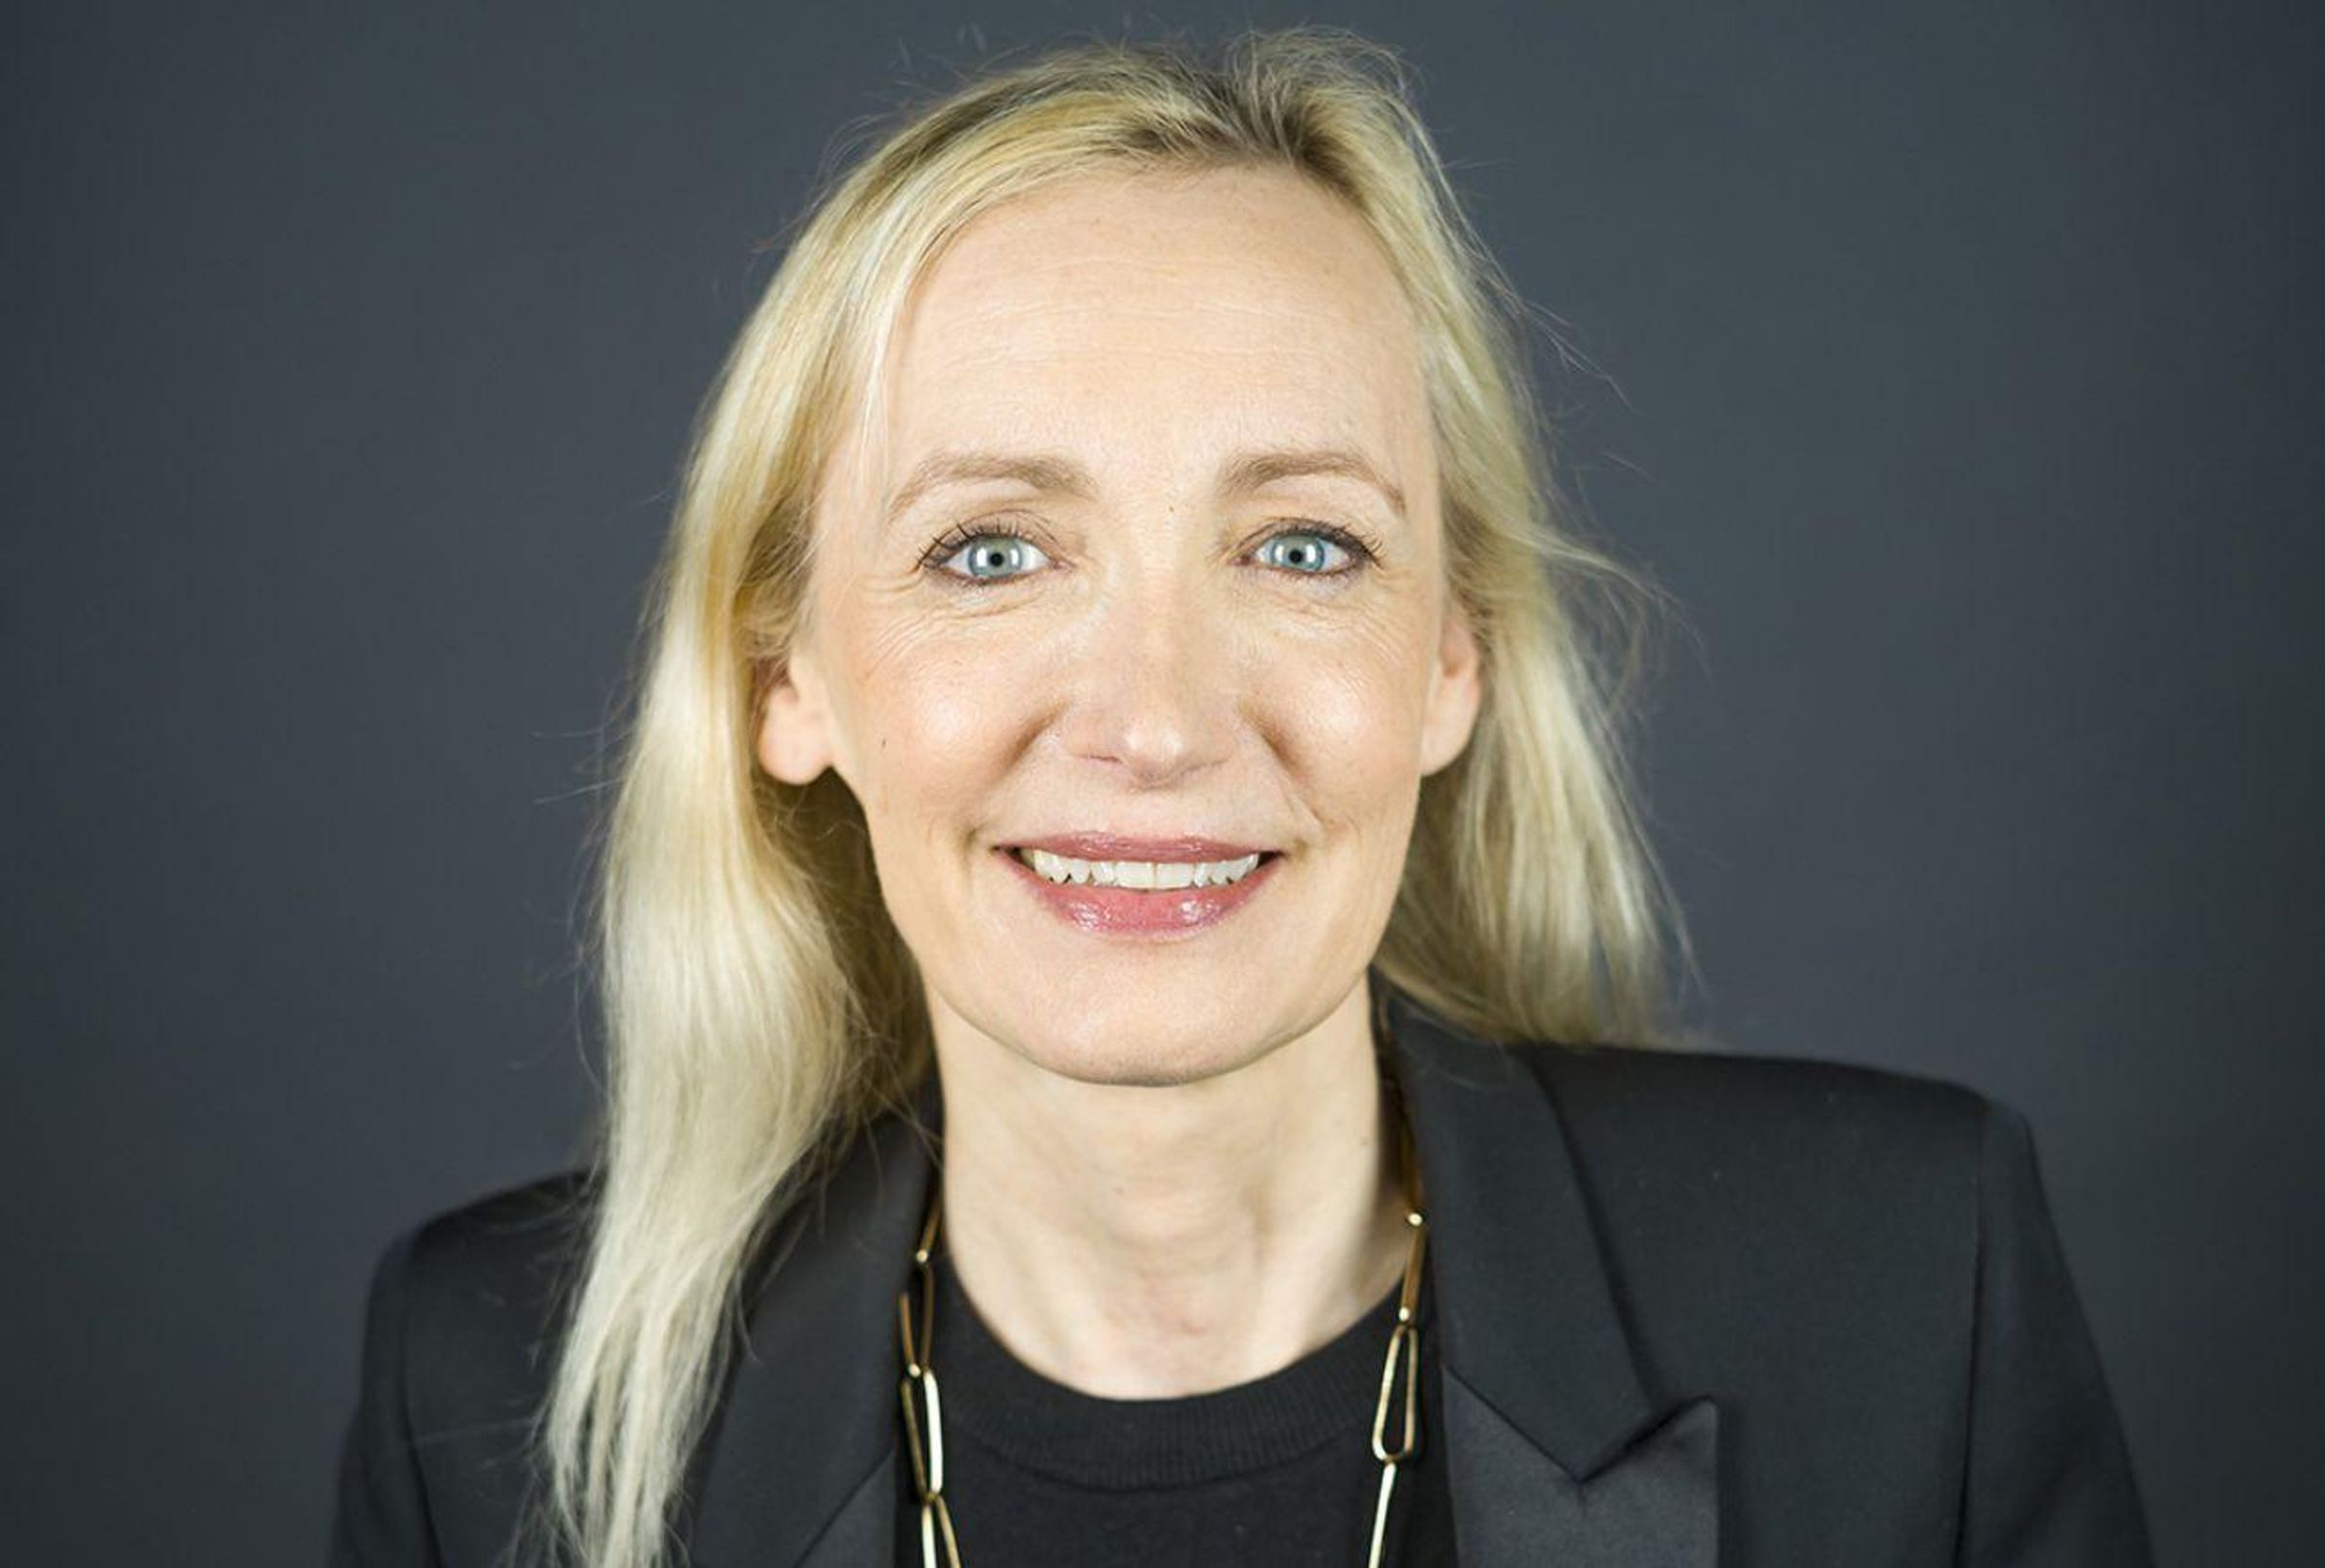 Carole Ferrand - Independent director at the Board of Directors of Sanofi and Member of the Audit Committee